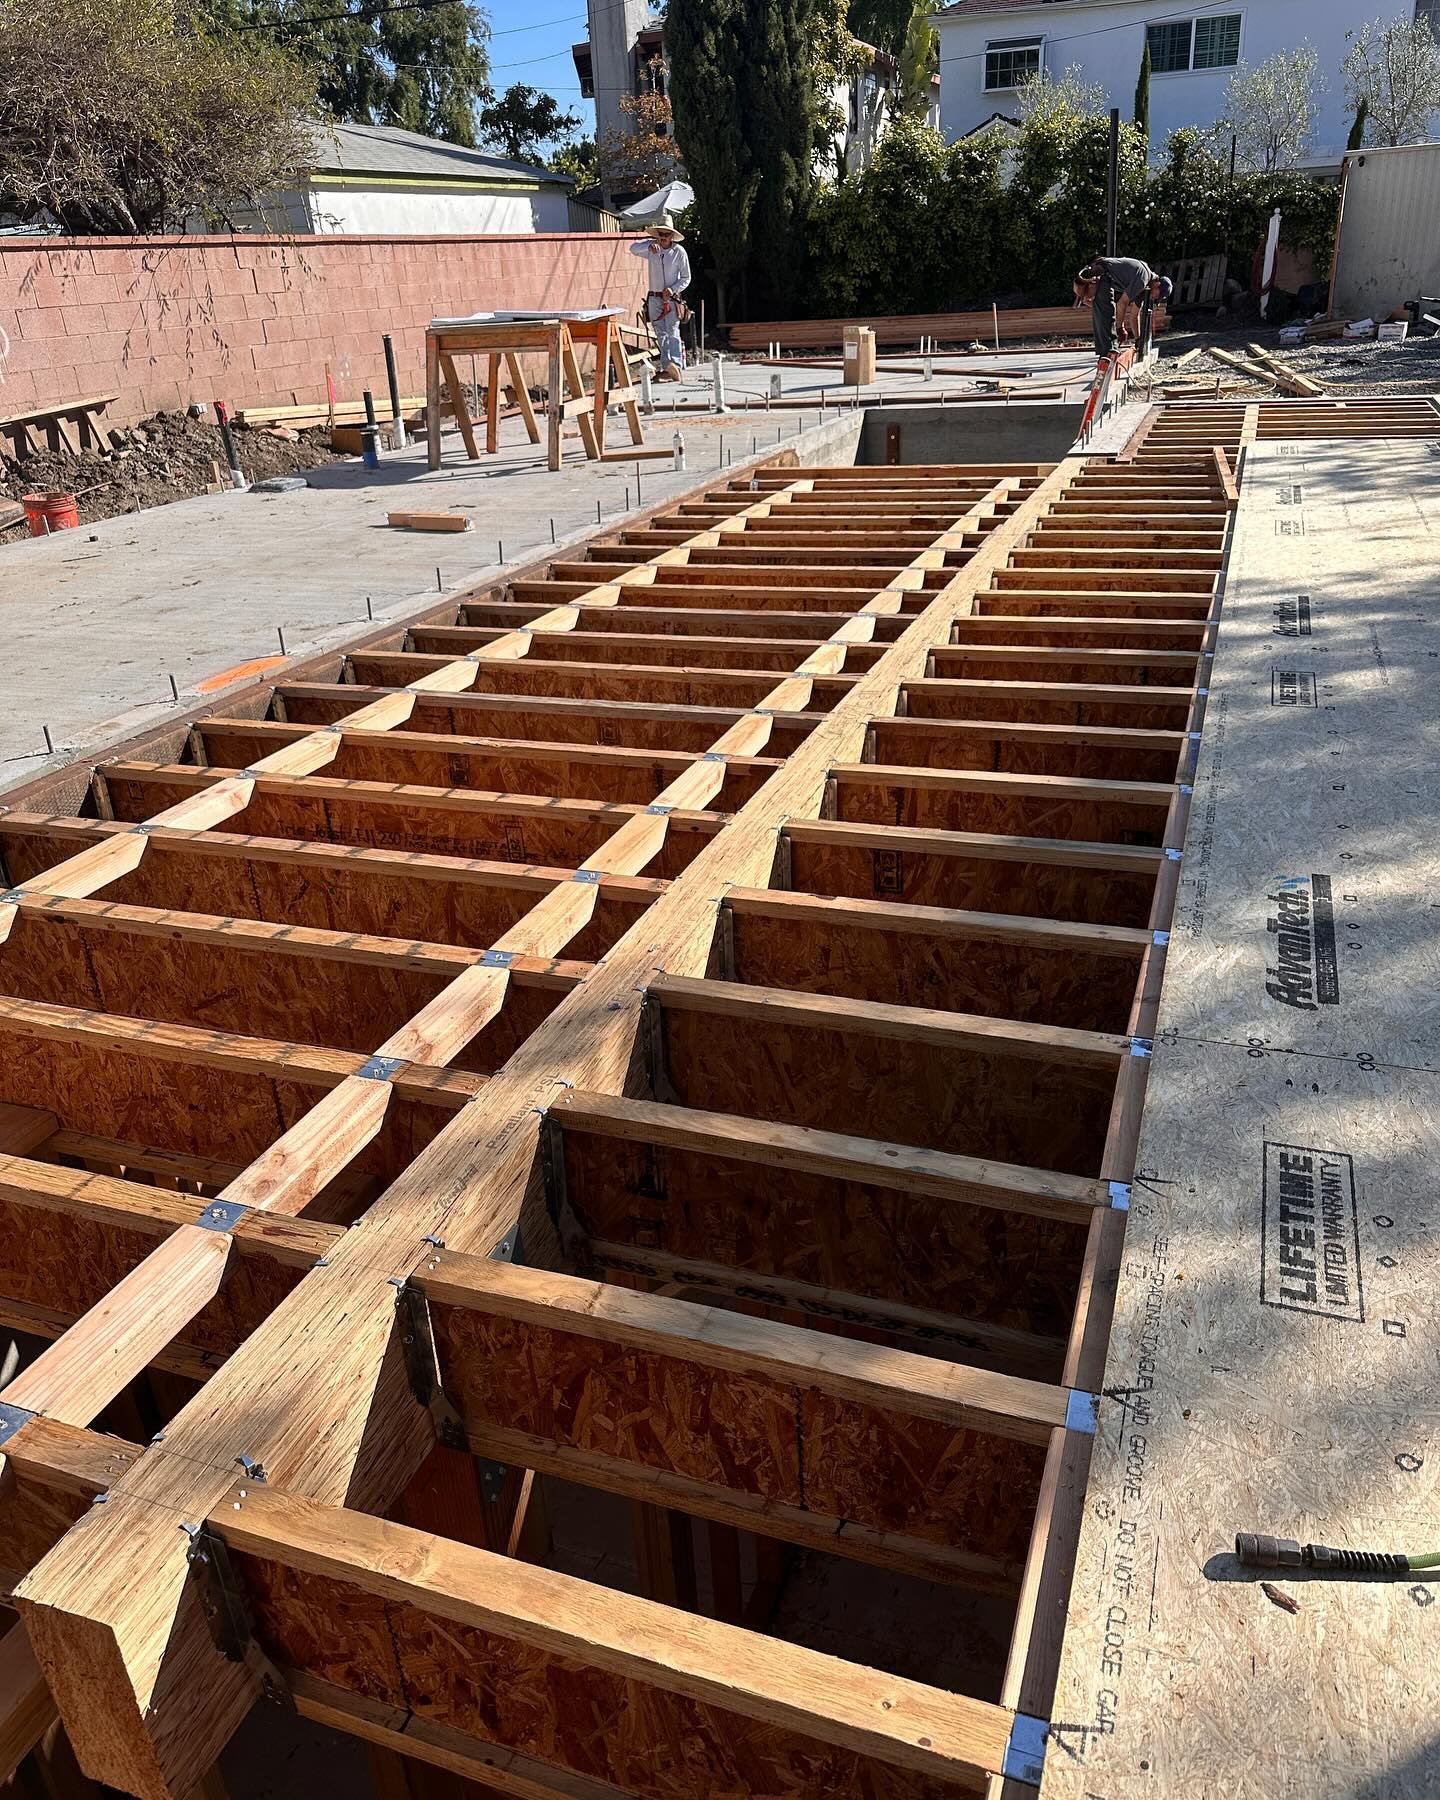 The transition from basement to 1st floor is almost complete at the Coolidge House. The stair framing just needs to go in, and upwards from there. 

#singlefamilyhome #architect #smallfirmarchitect #newconstruction #homeconstruction #basement #framin